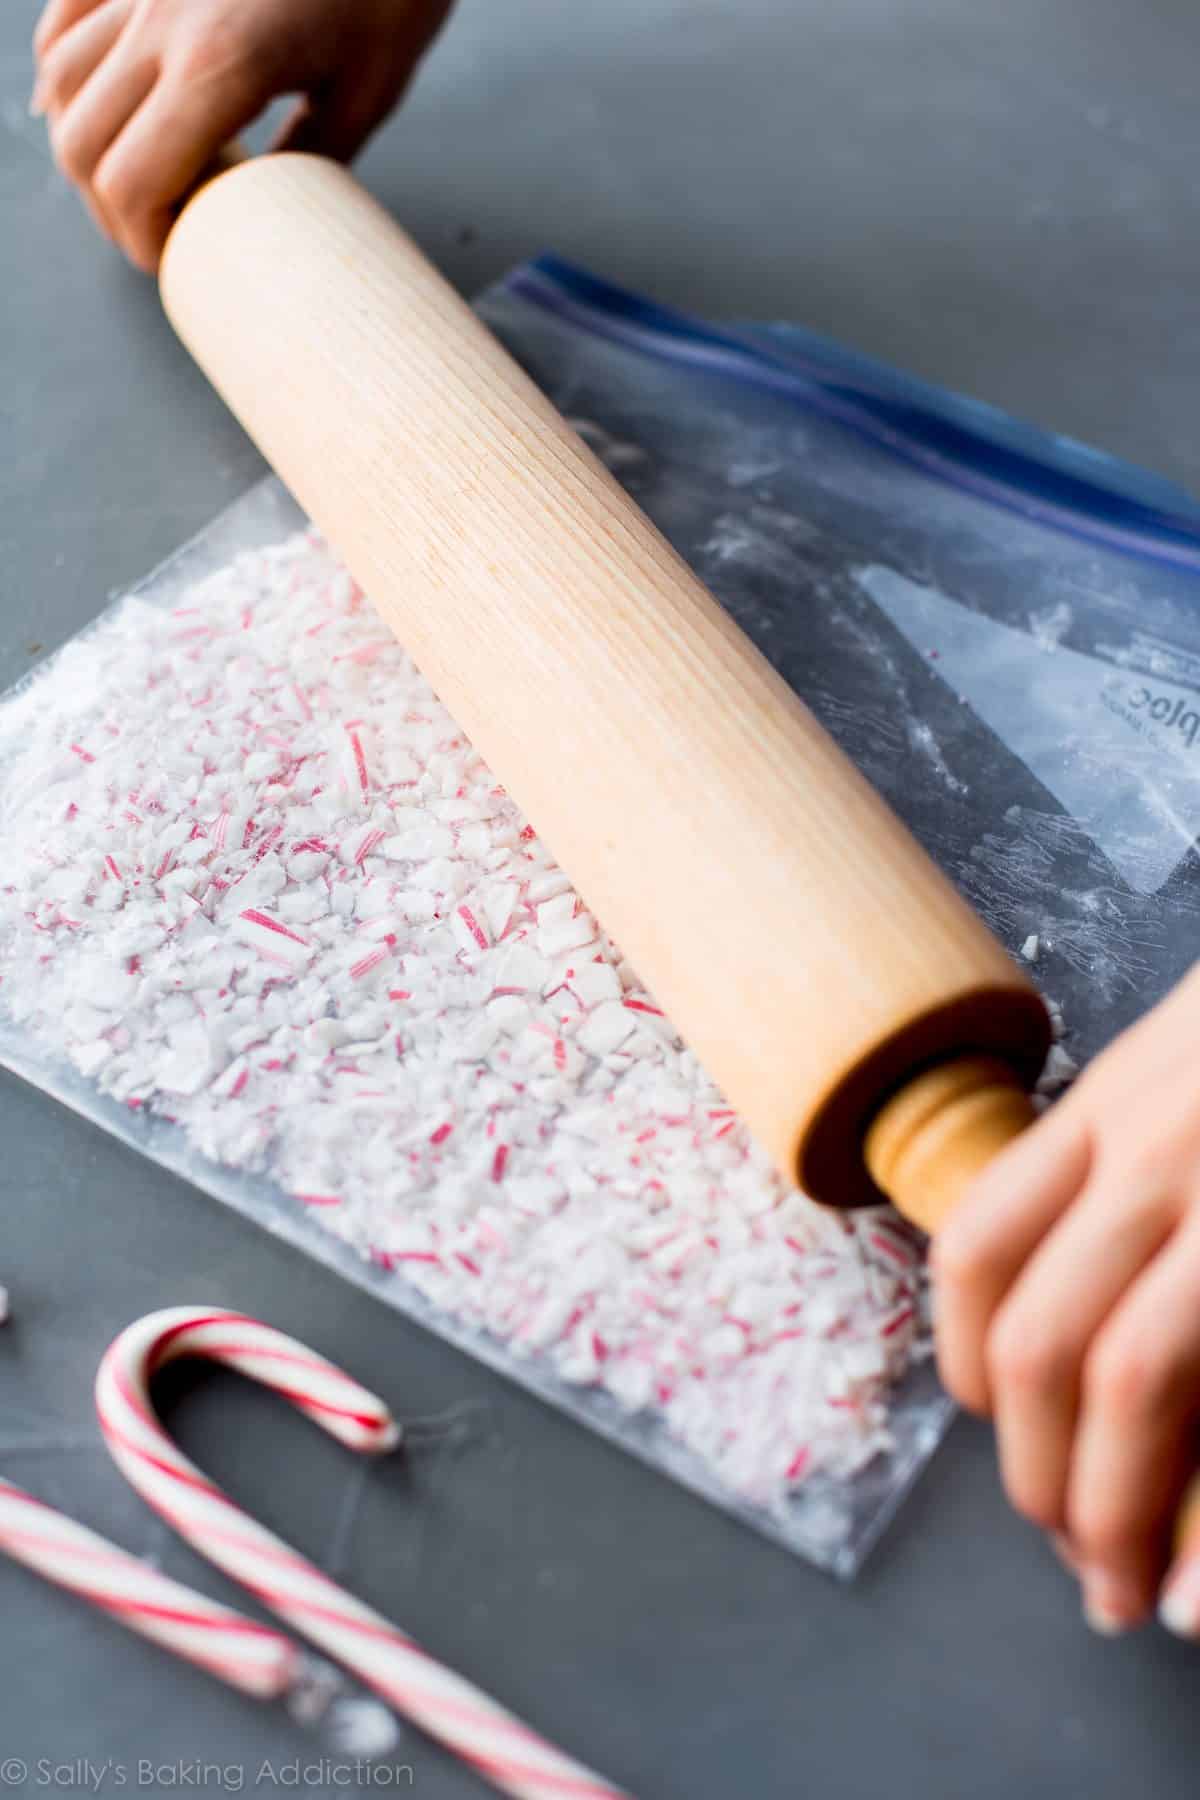 hands using a rolling pin to crush candy canes in a zip-top bag